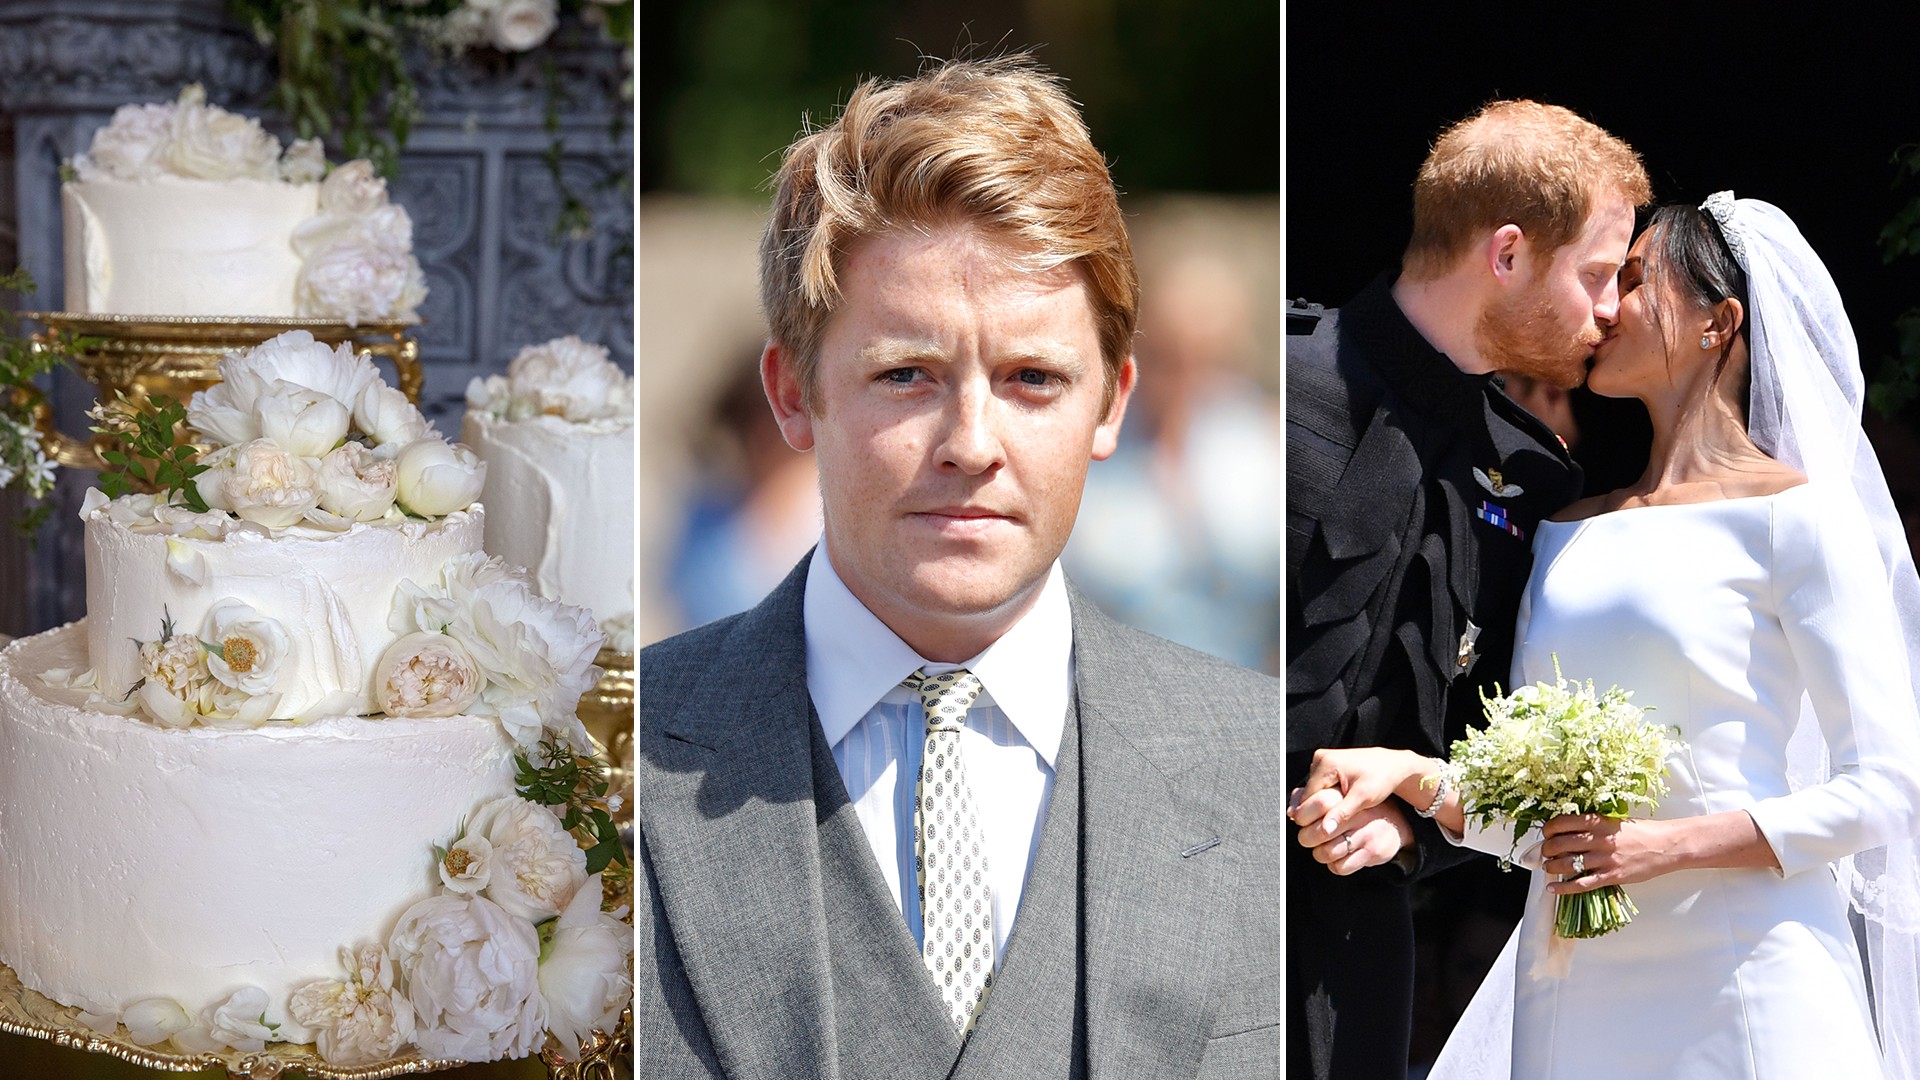 The Duke of Westminster and Prince Harry on his wedding day to Meghan Markle